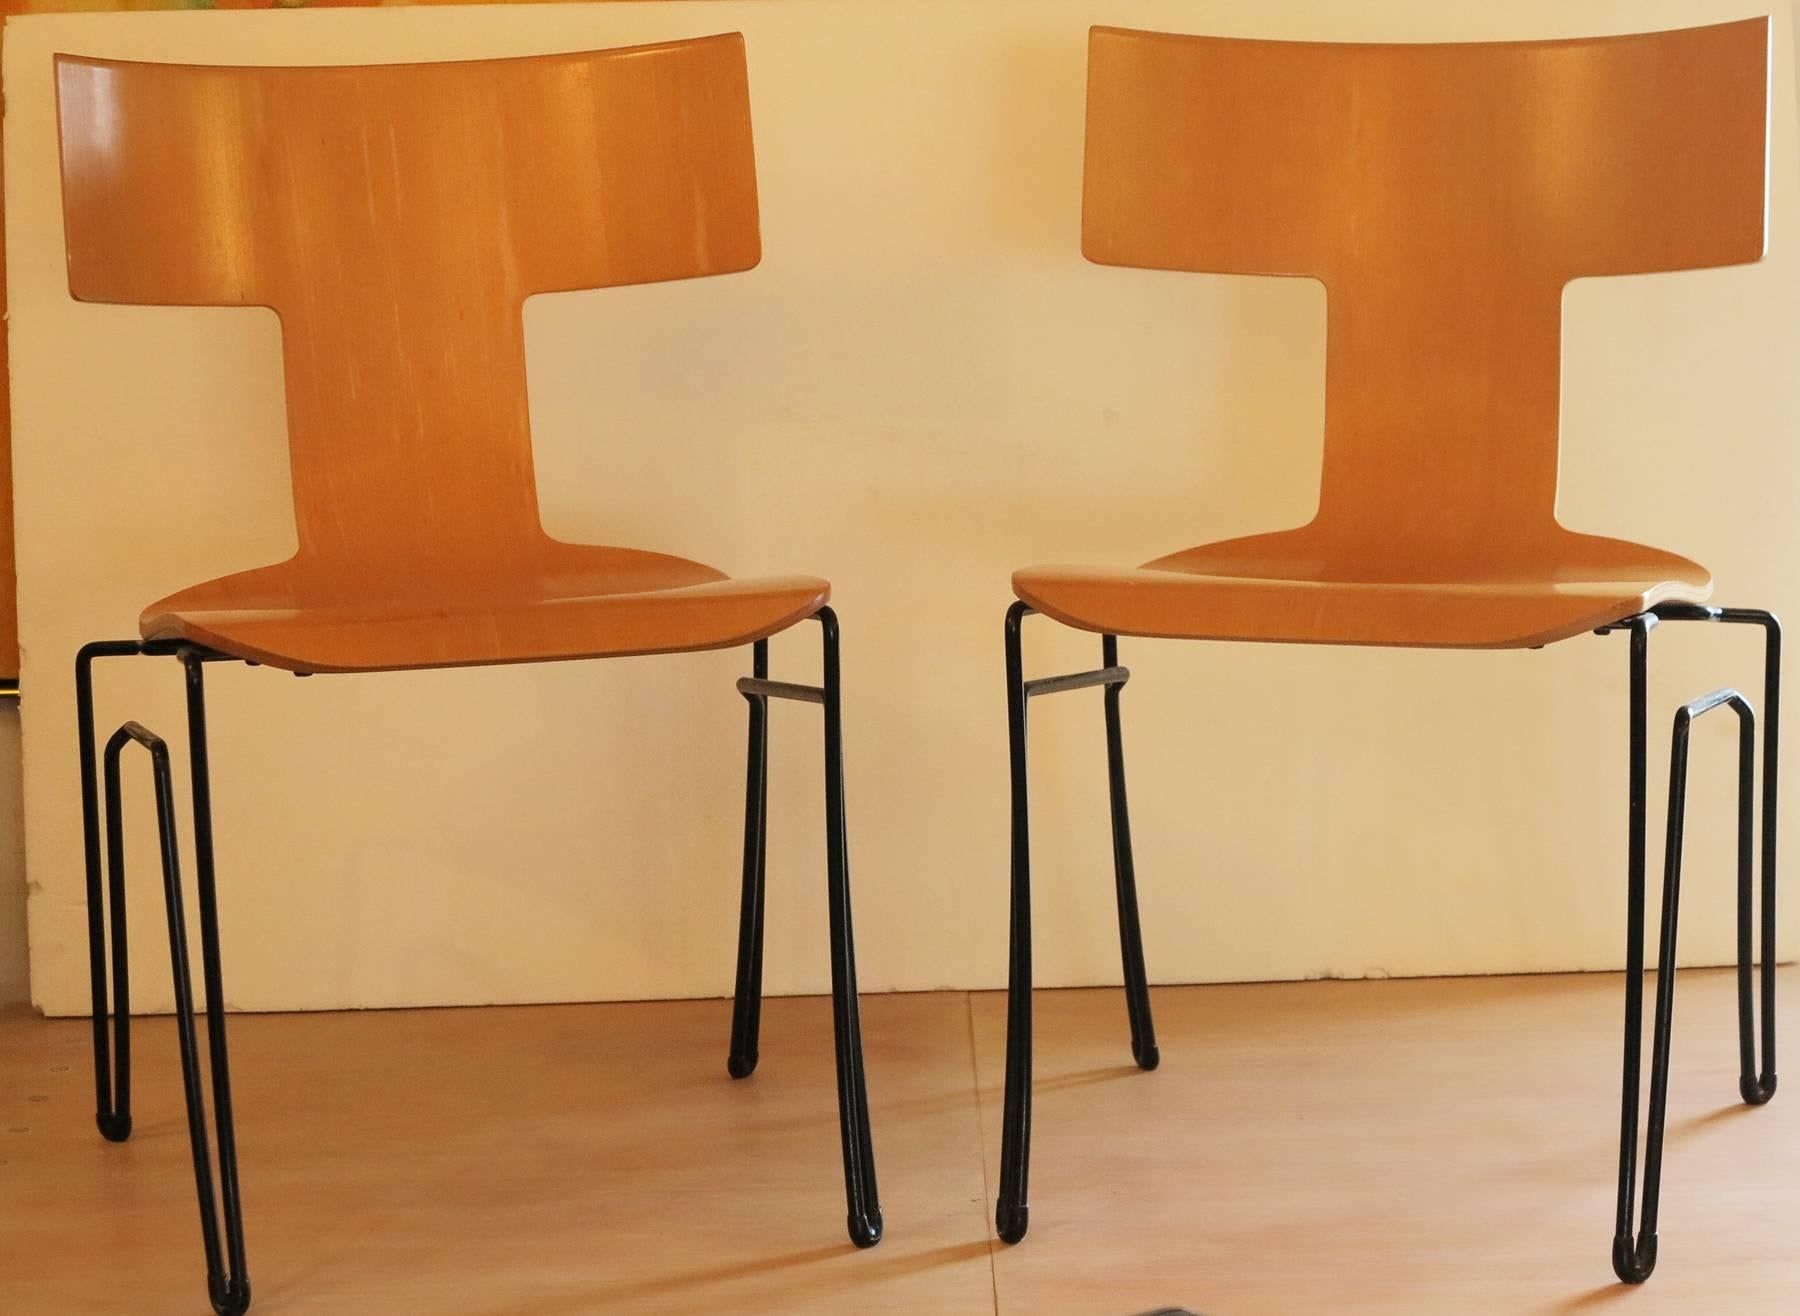 Anziano chairs by John Hutton for Donghia. The chairs retain their original finish and are in excellent condition.